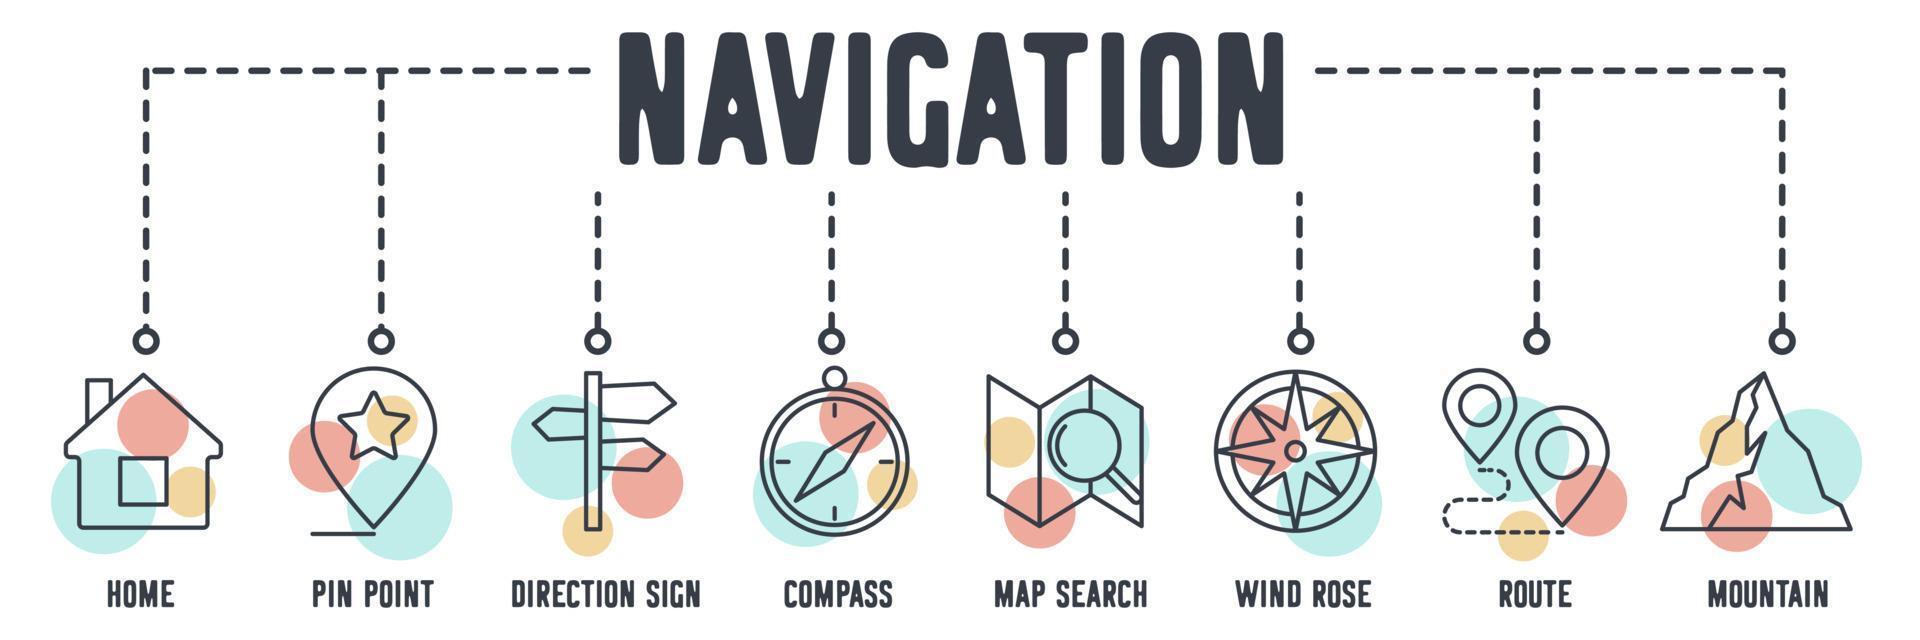 Navigation banner web icon. home, pin point, direction sign, compass, map search, wind rose, route, mountain vector illustration concept.